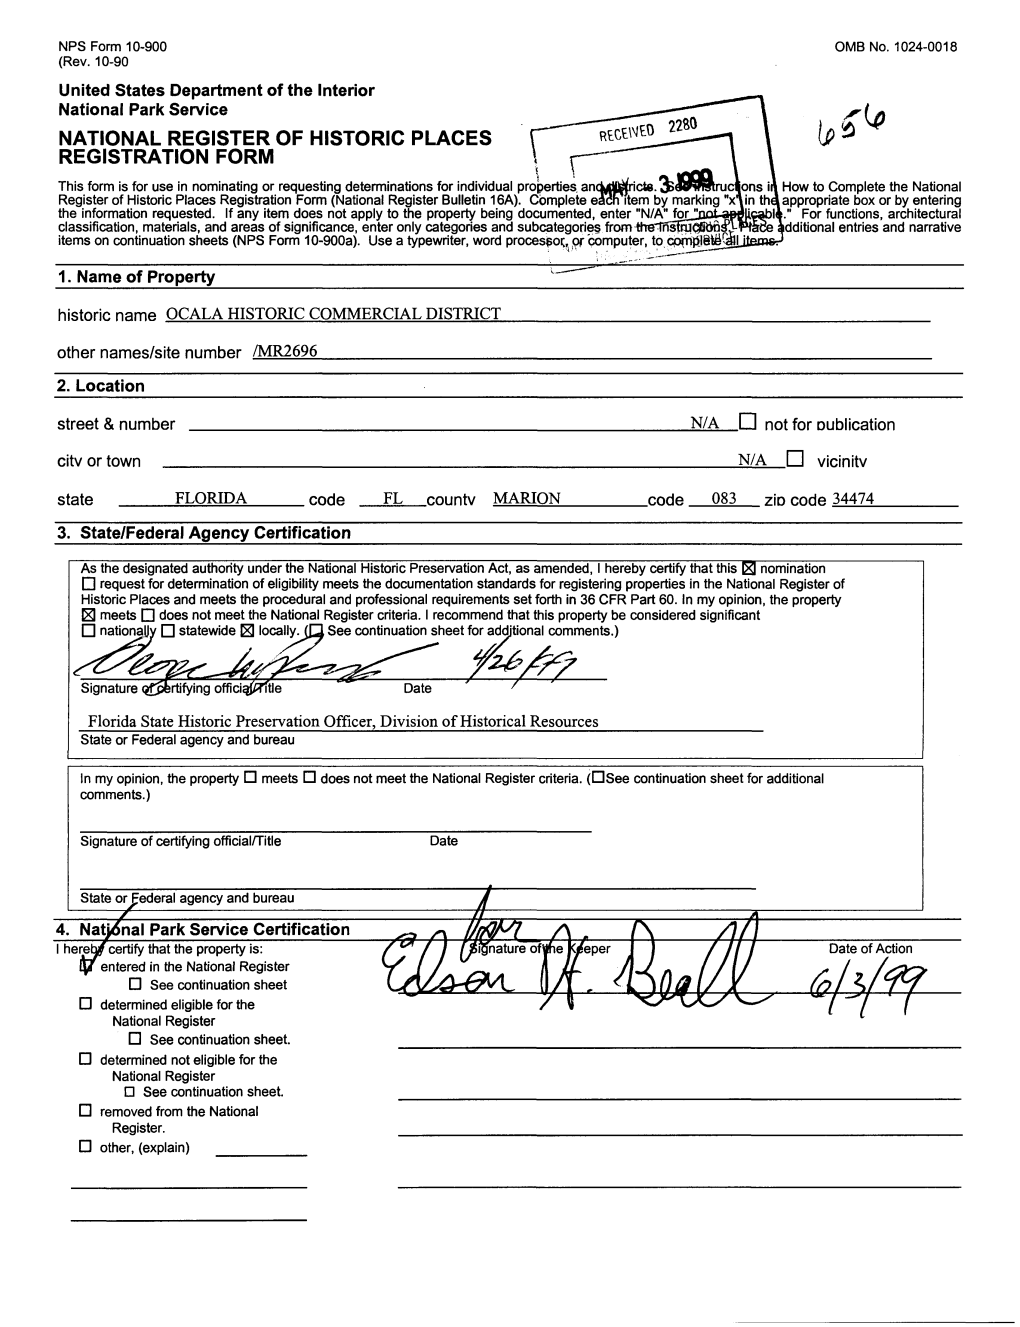 NATIONAL REGISTER of HISTORIC PLACES REGISTRATION FORM This Form Is for Use in Nominating Or Requesting Determinations for Individual Properties